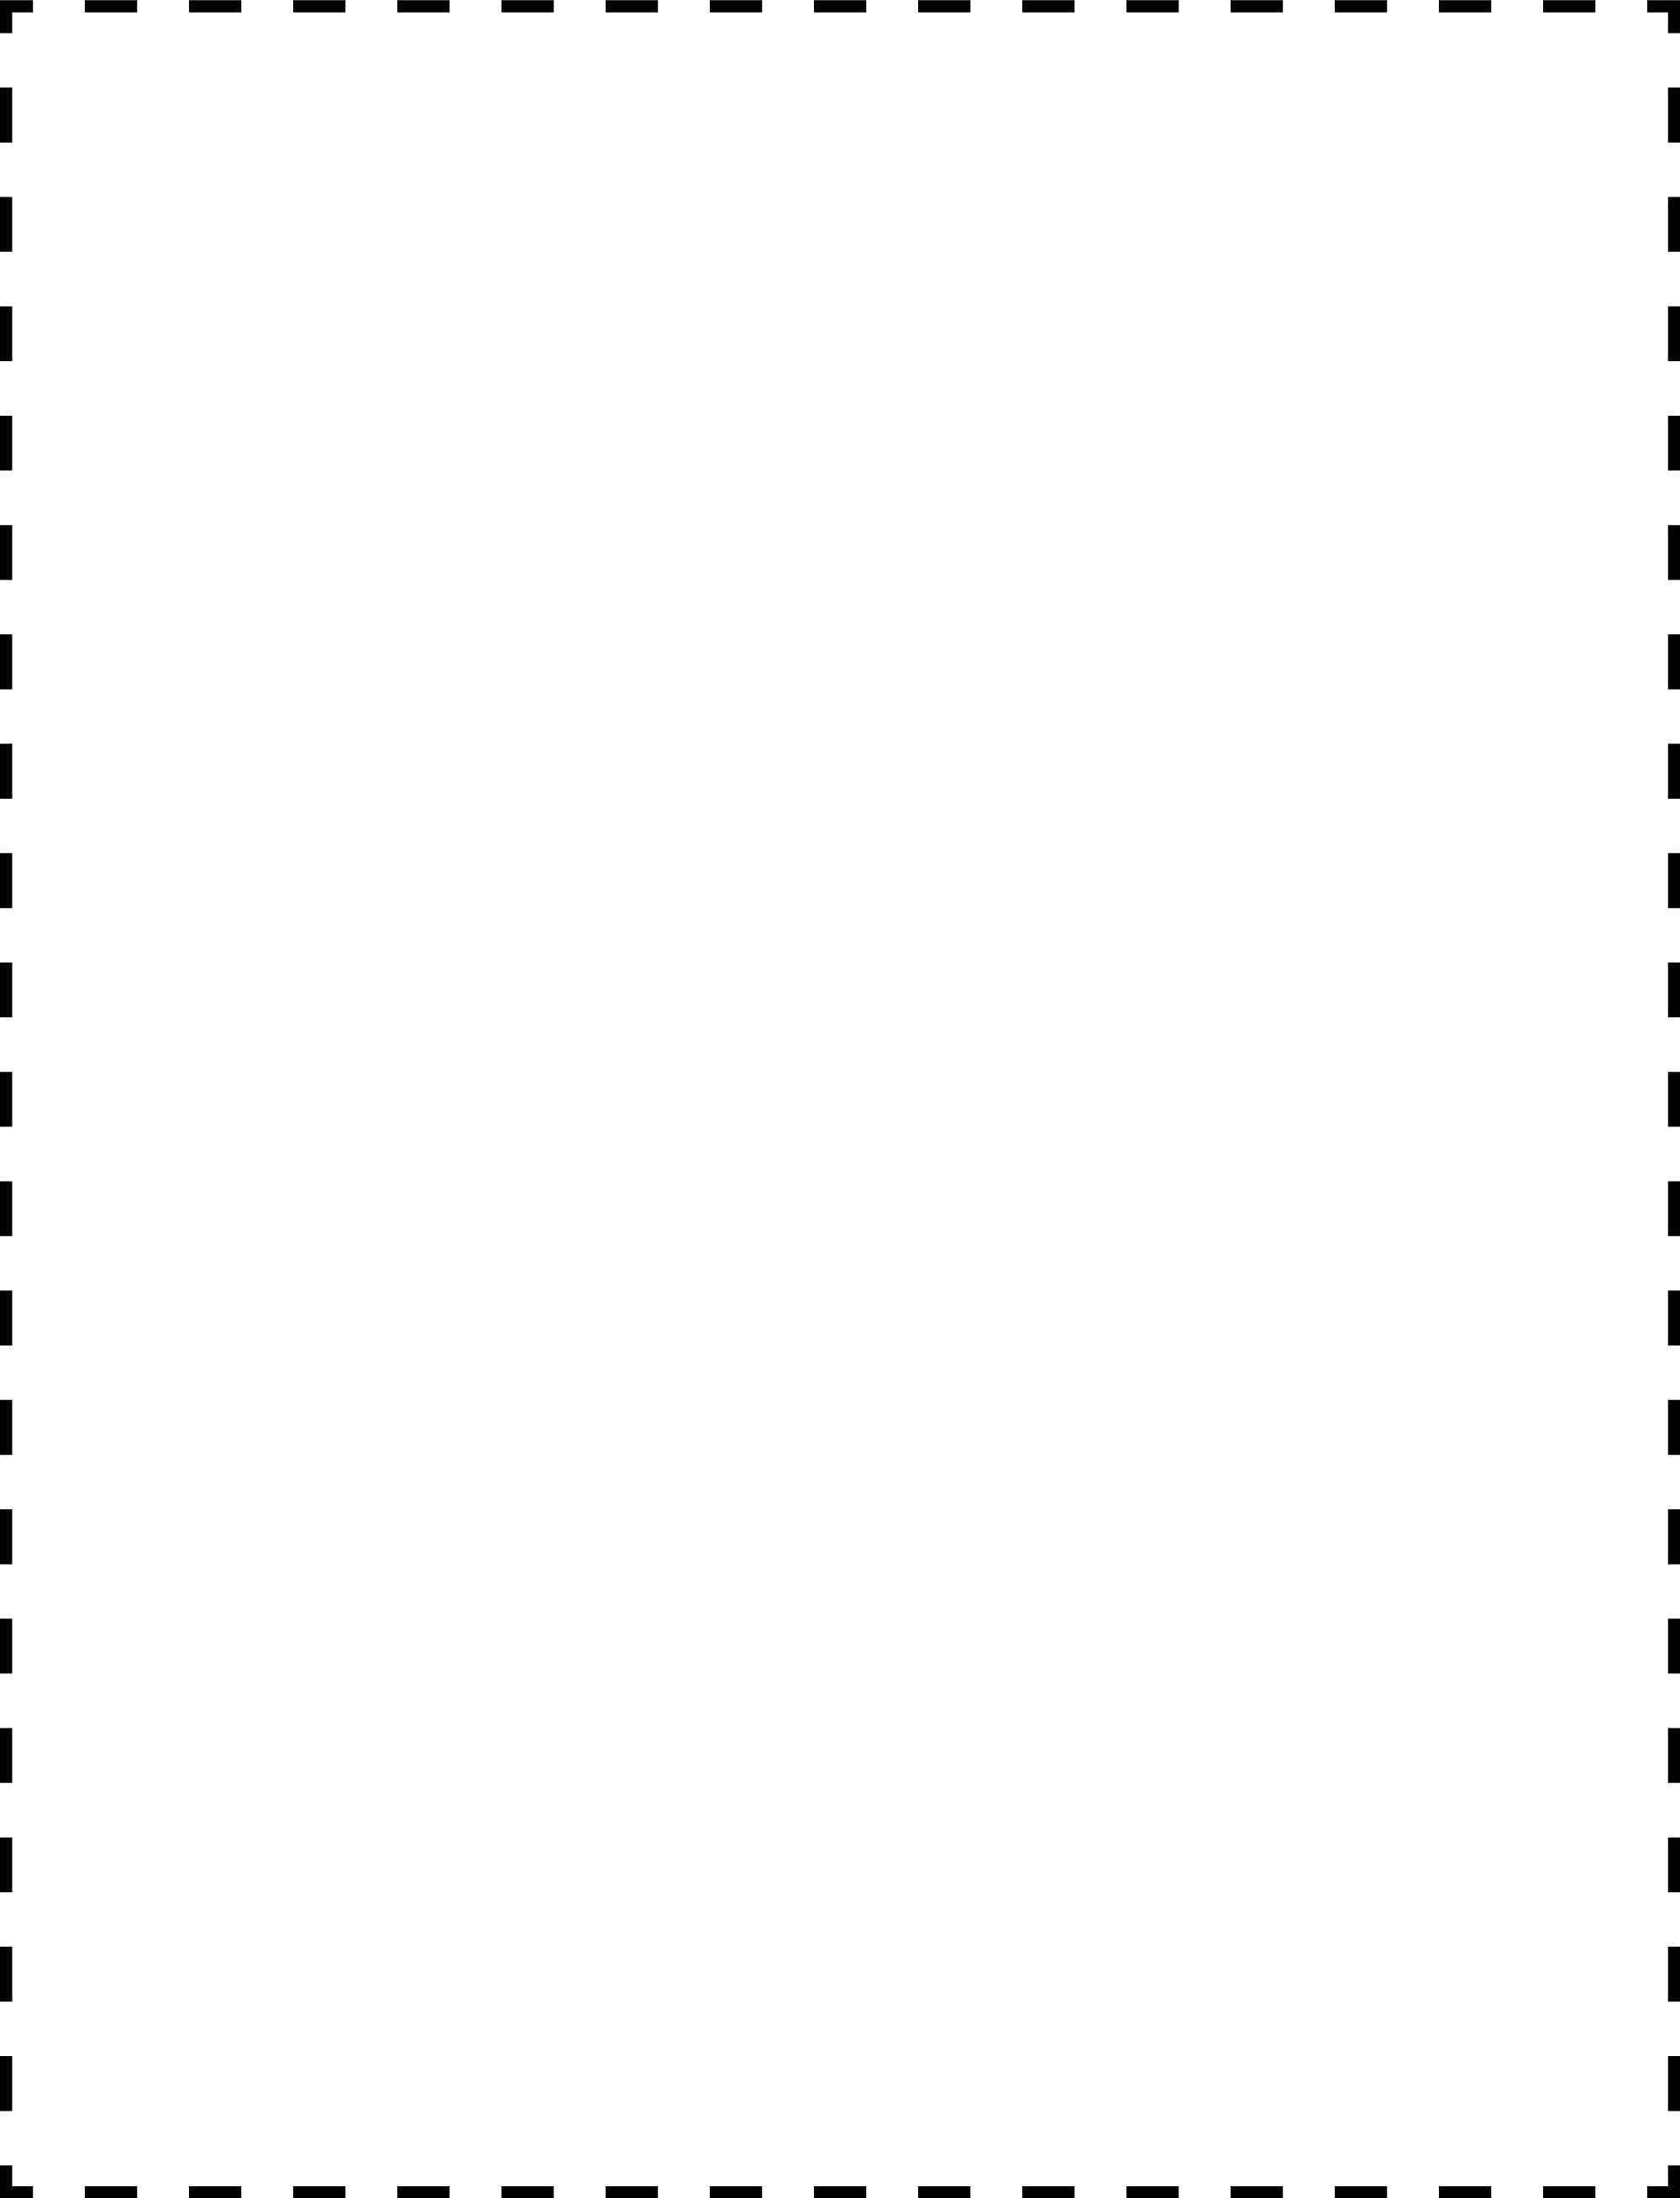 2645-coupon-outline-4x5-k.png